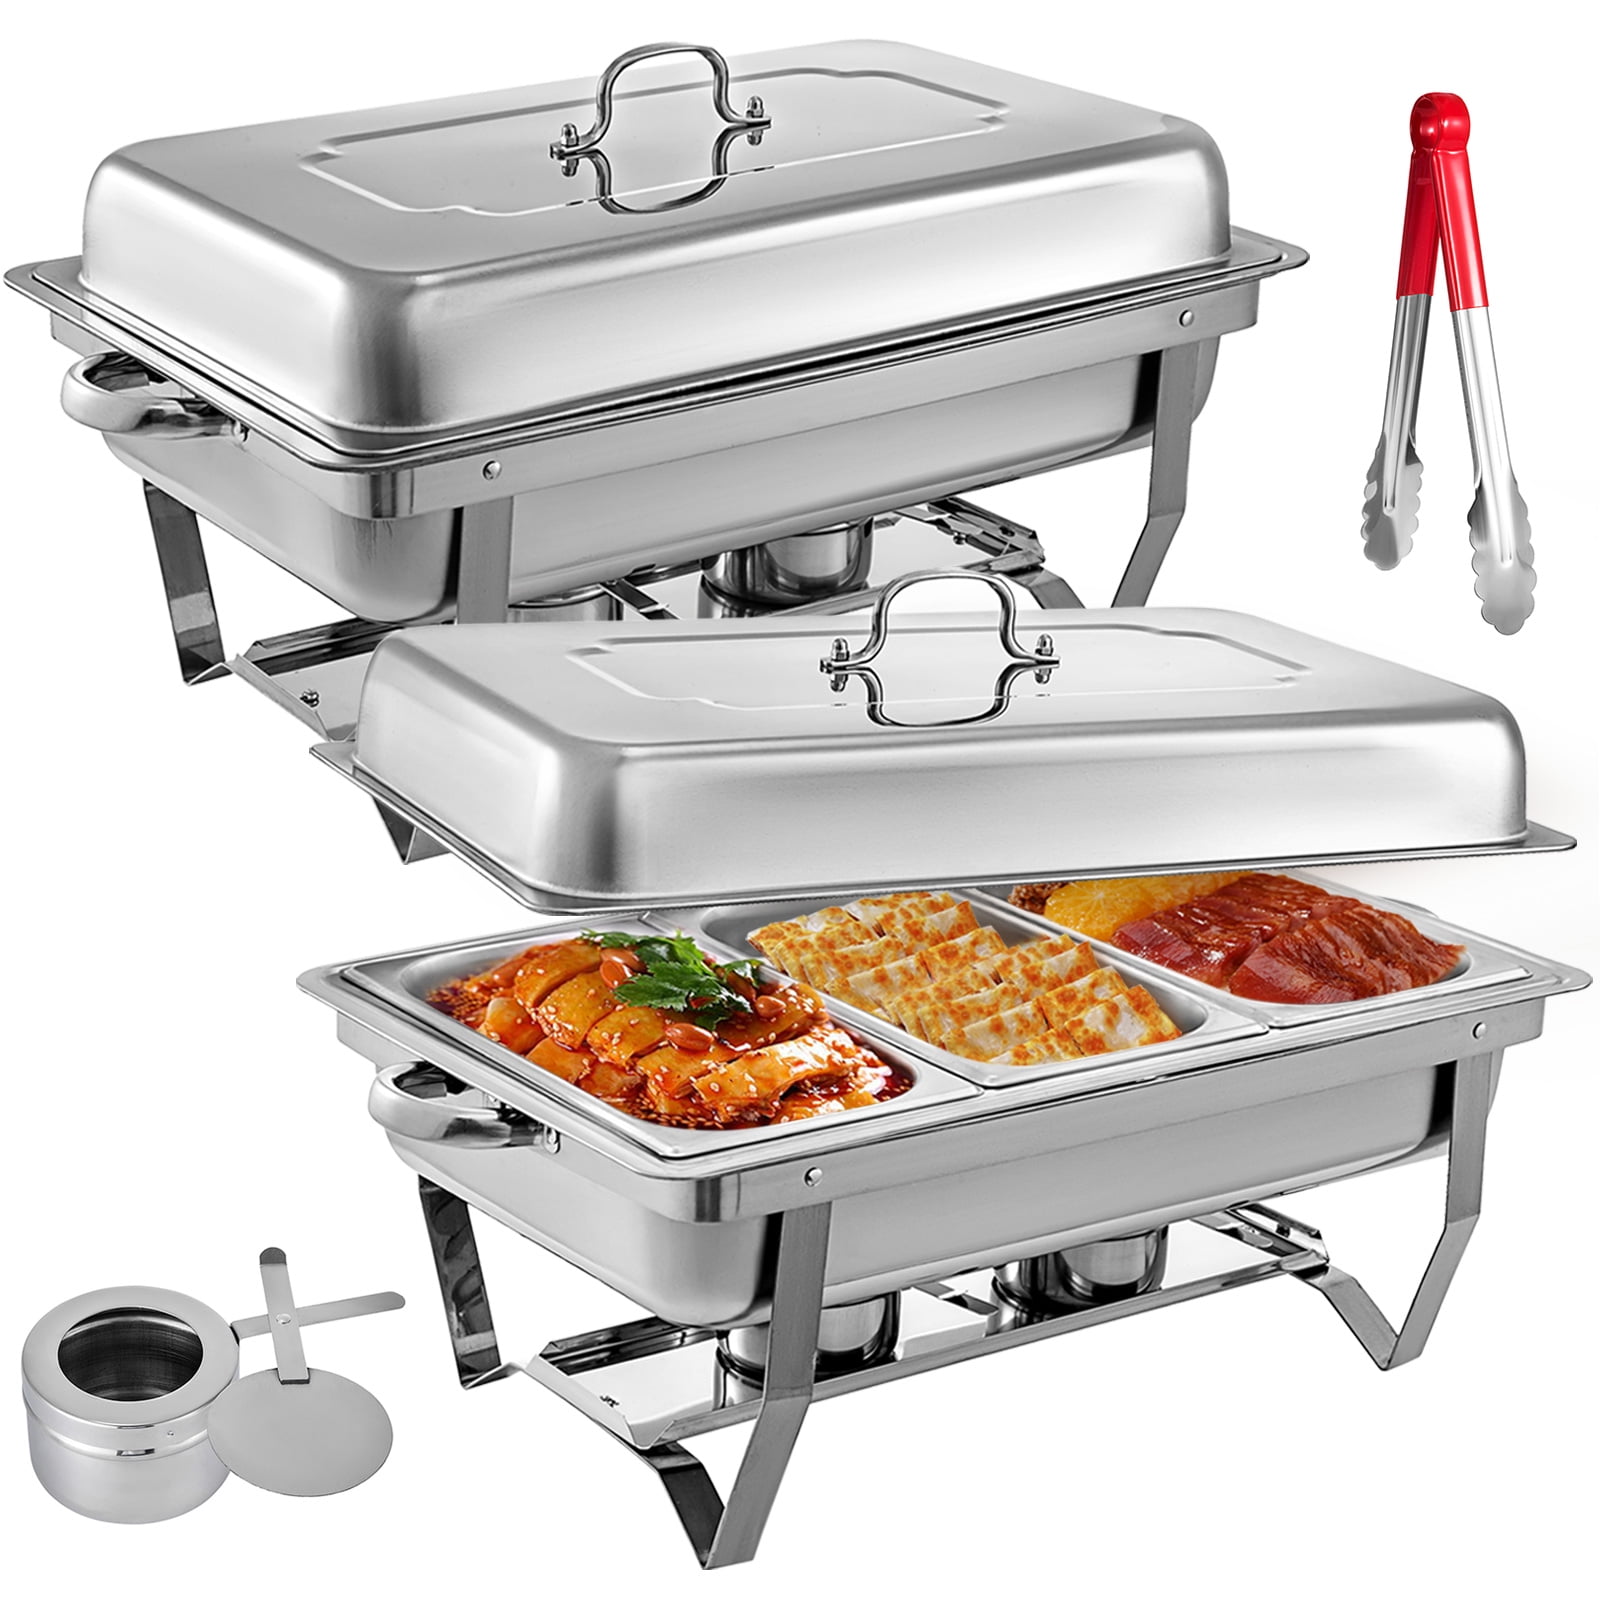 Stainless Steel Chafing Dish Buffet Set